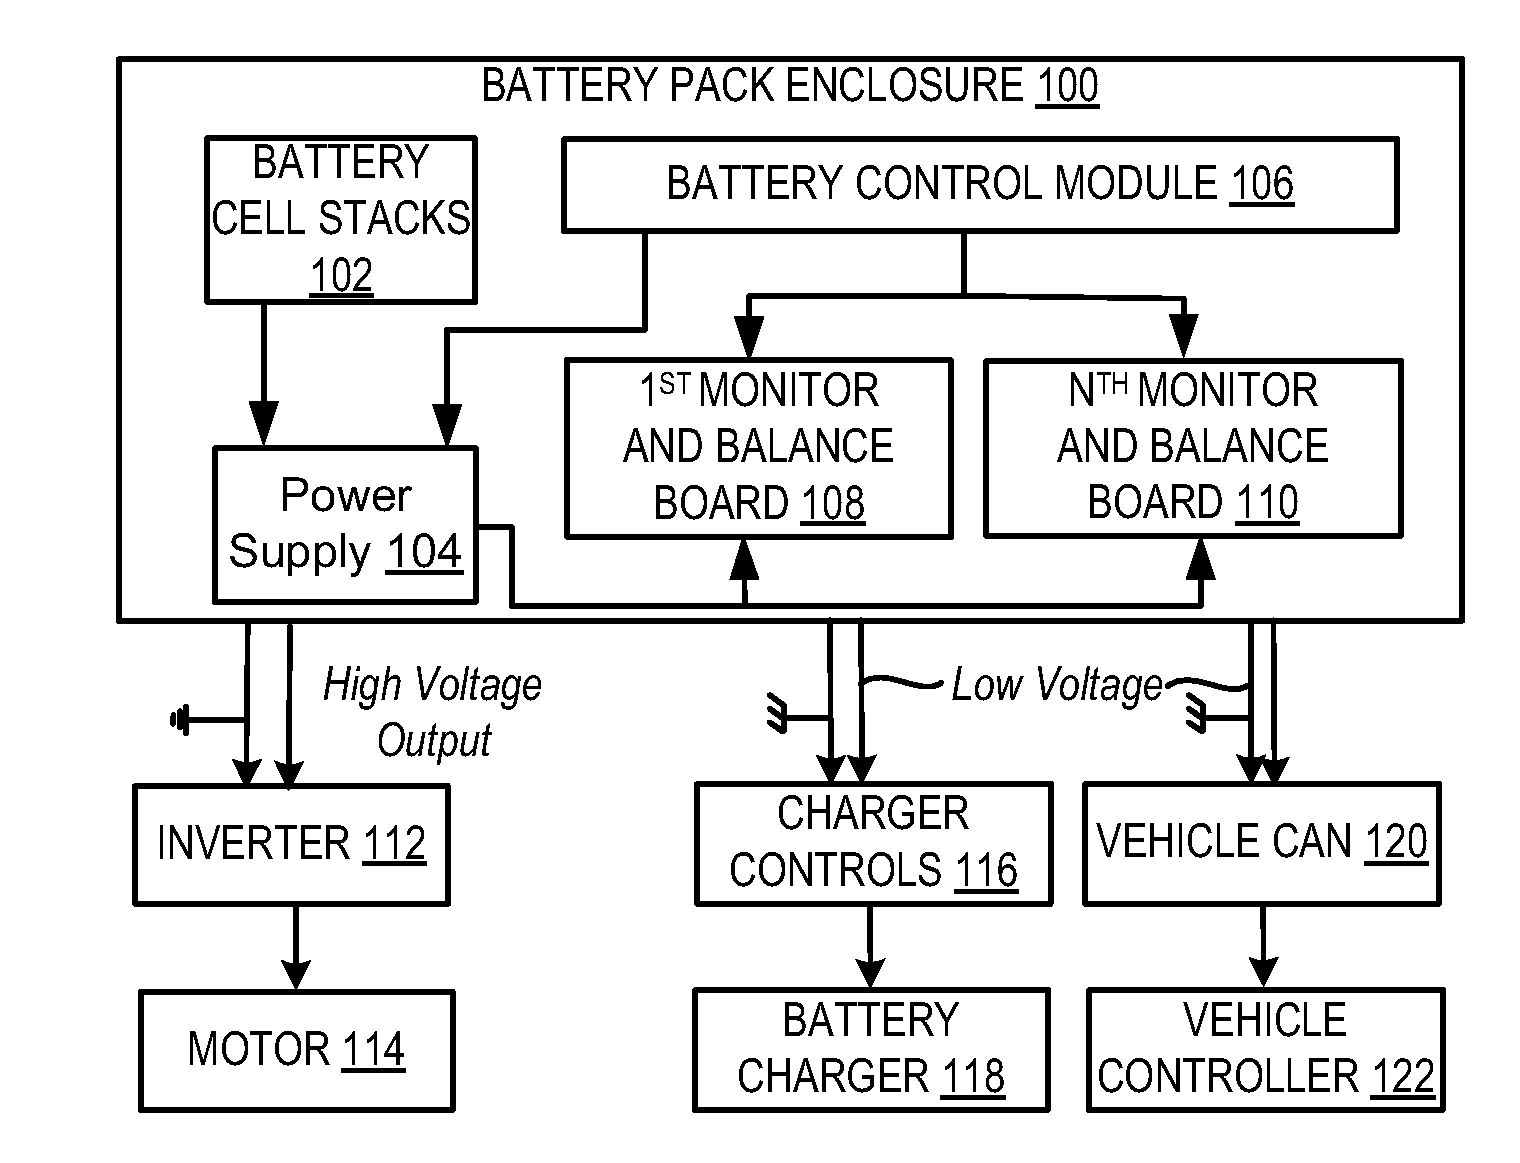 System and Method Providing Power Within a Battery Pack